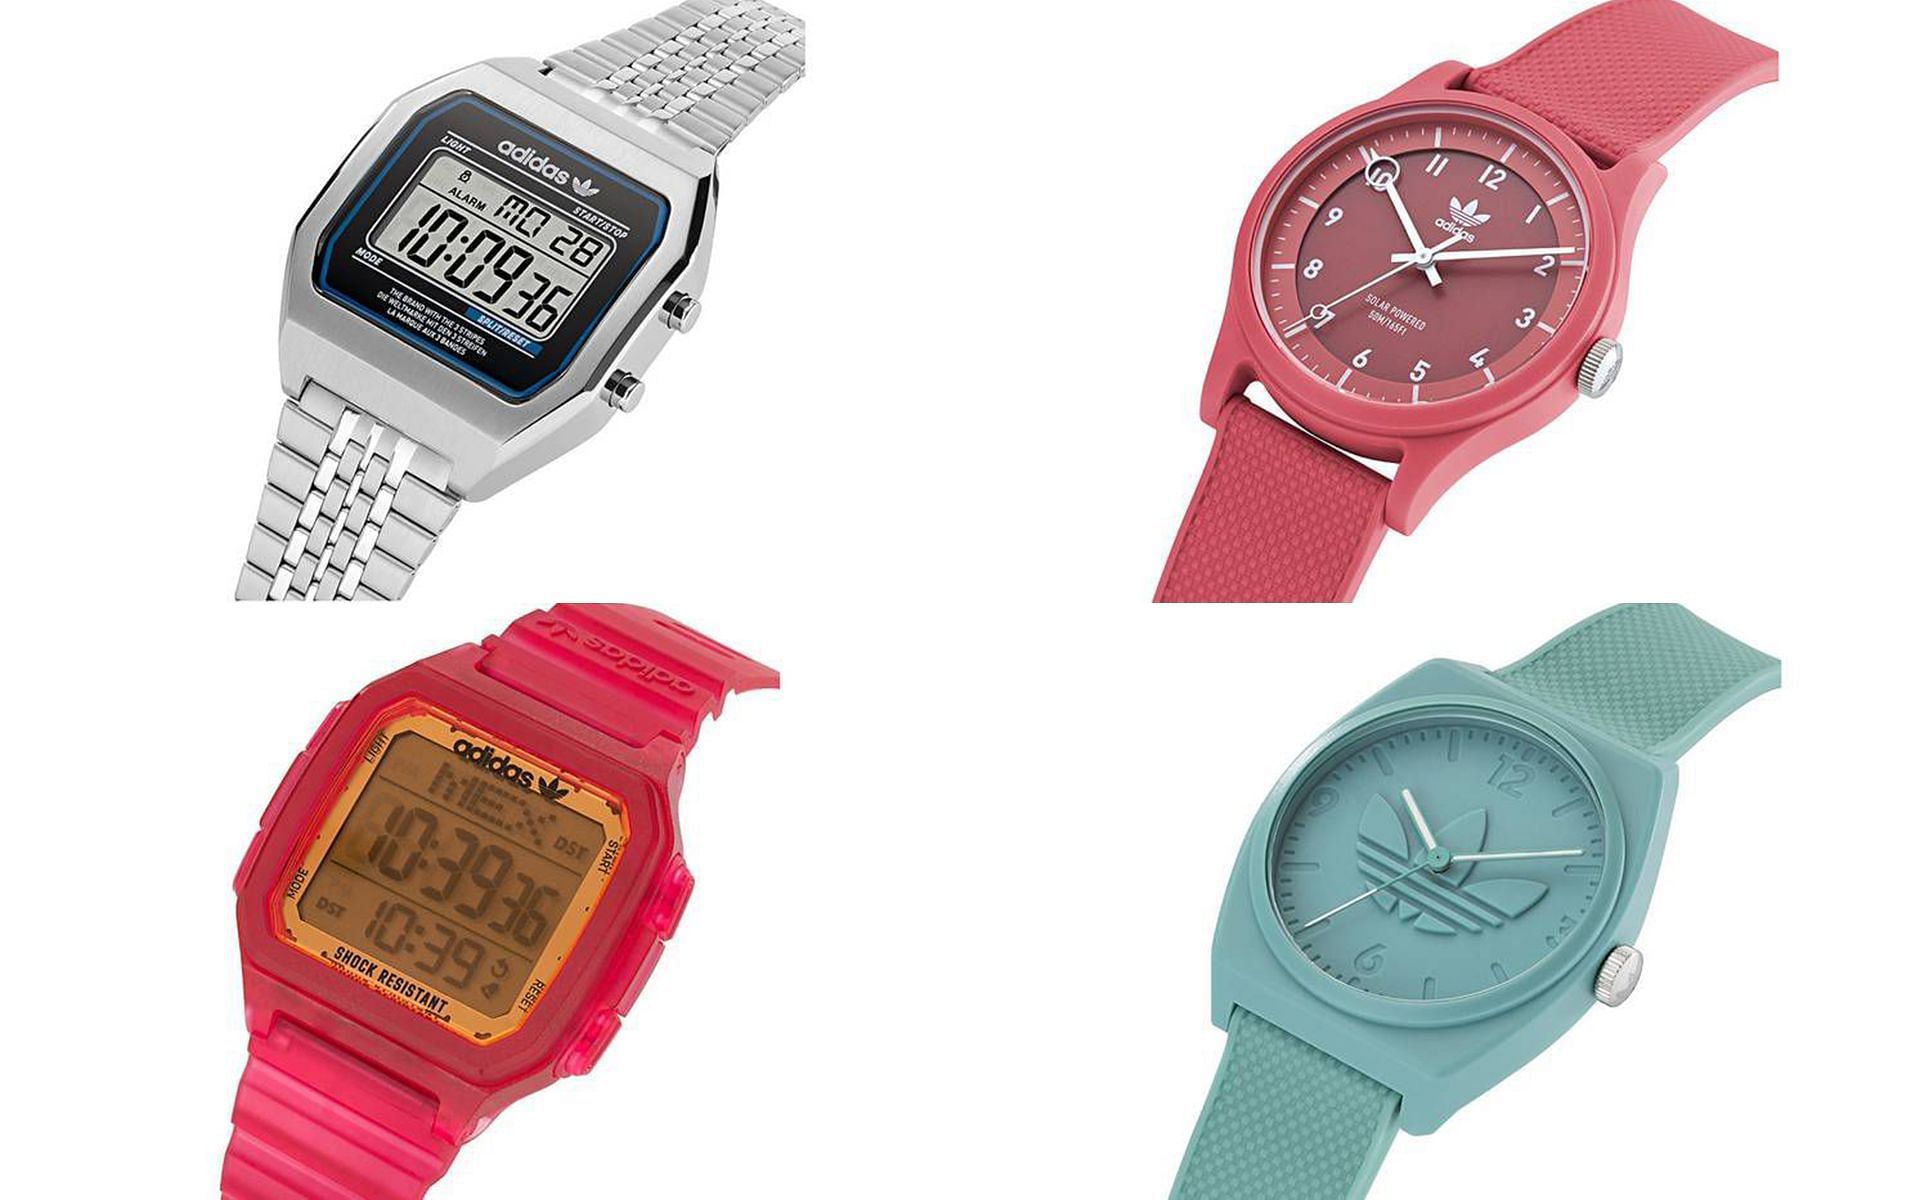 Adidas Originals x Timex created colorful watches with metal and rubber straps (Image via Sportskeeda)